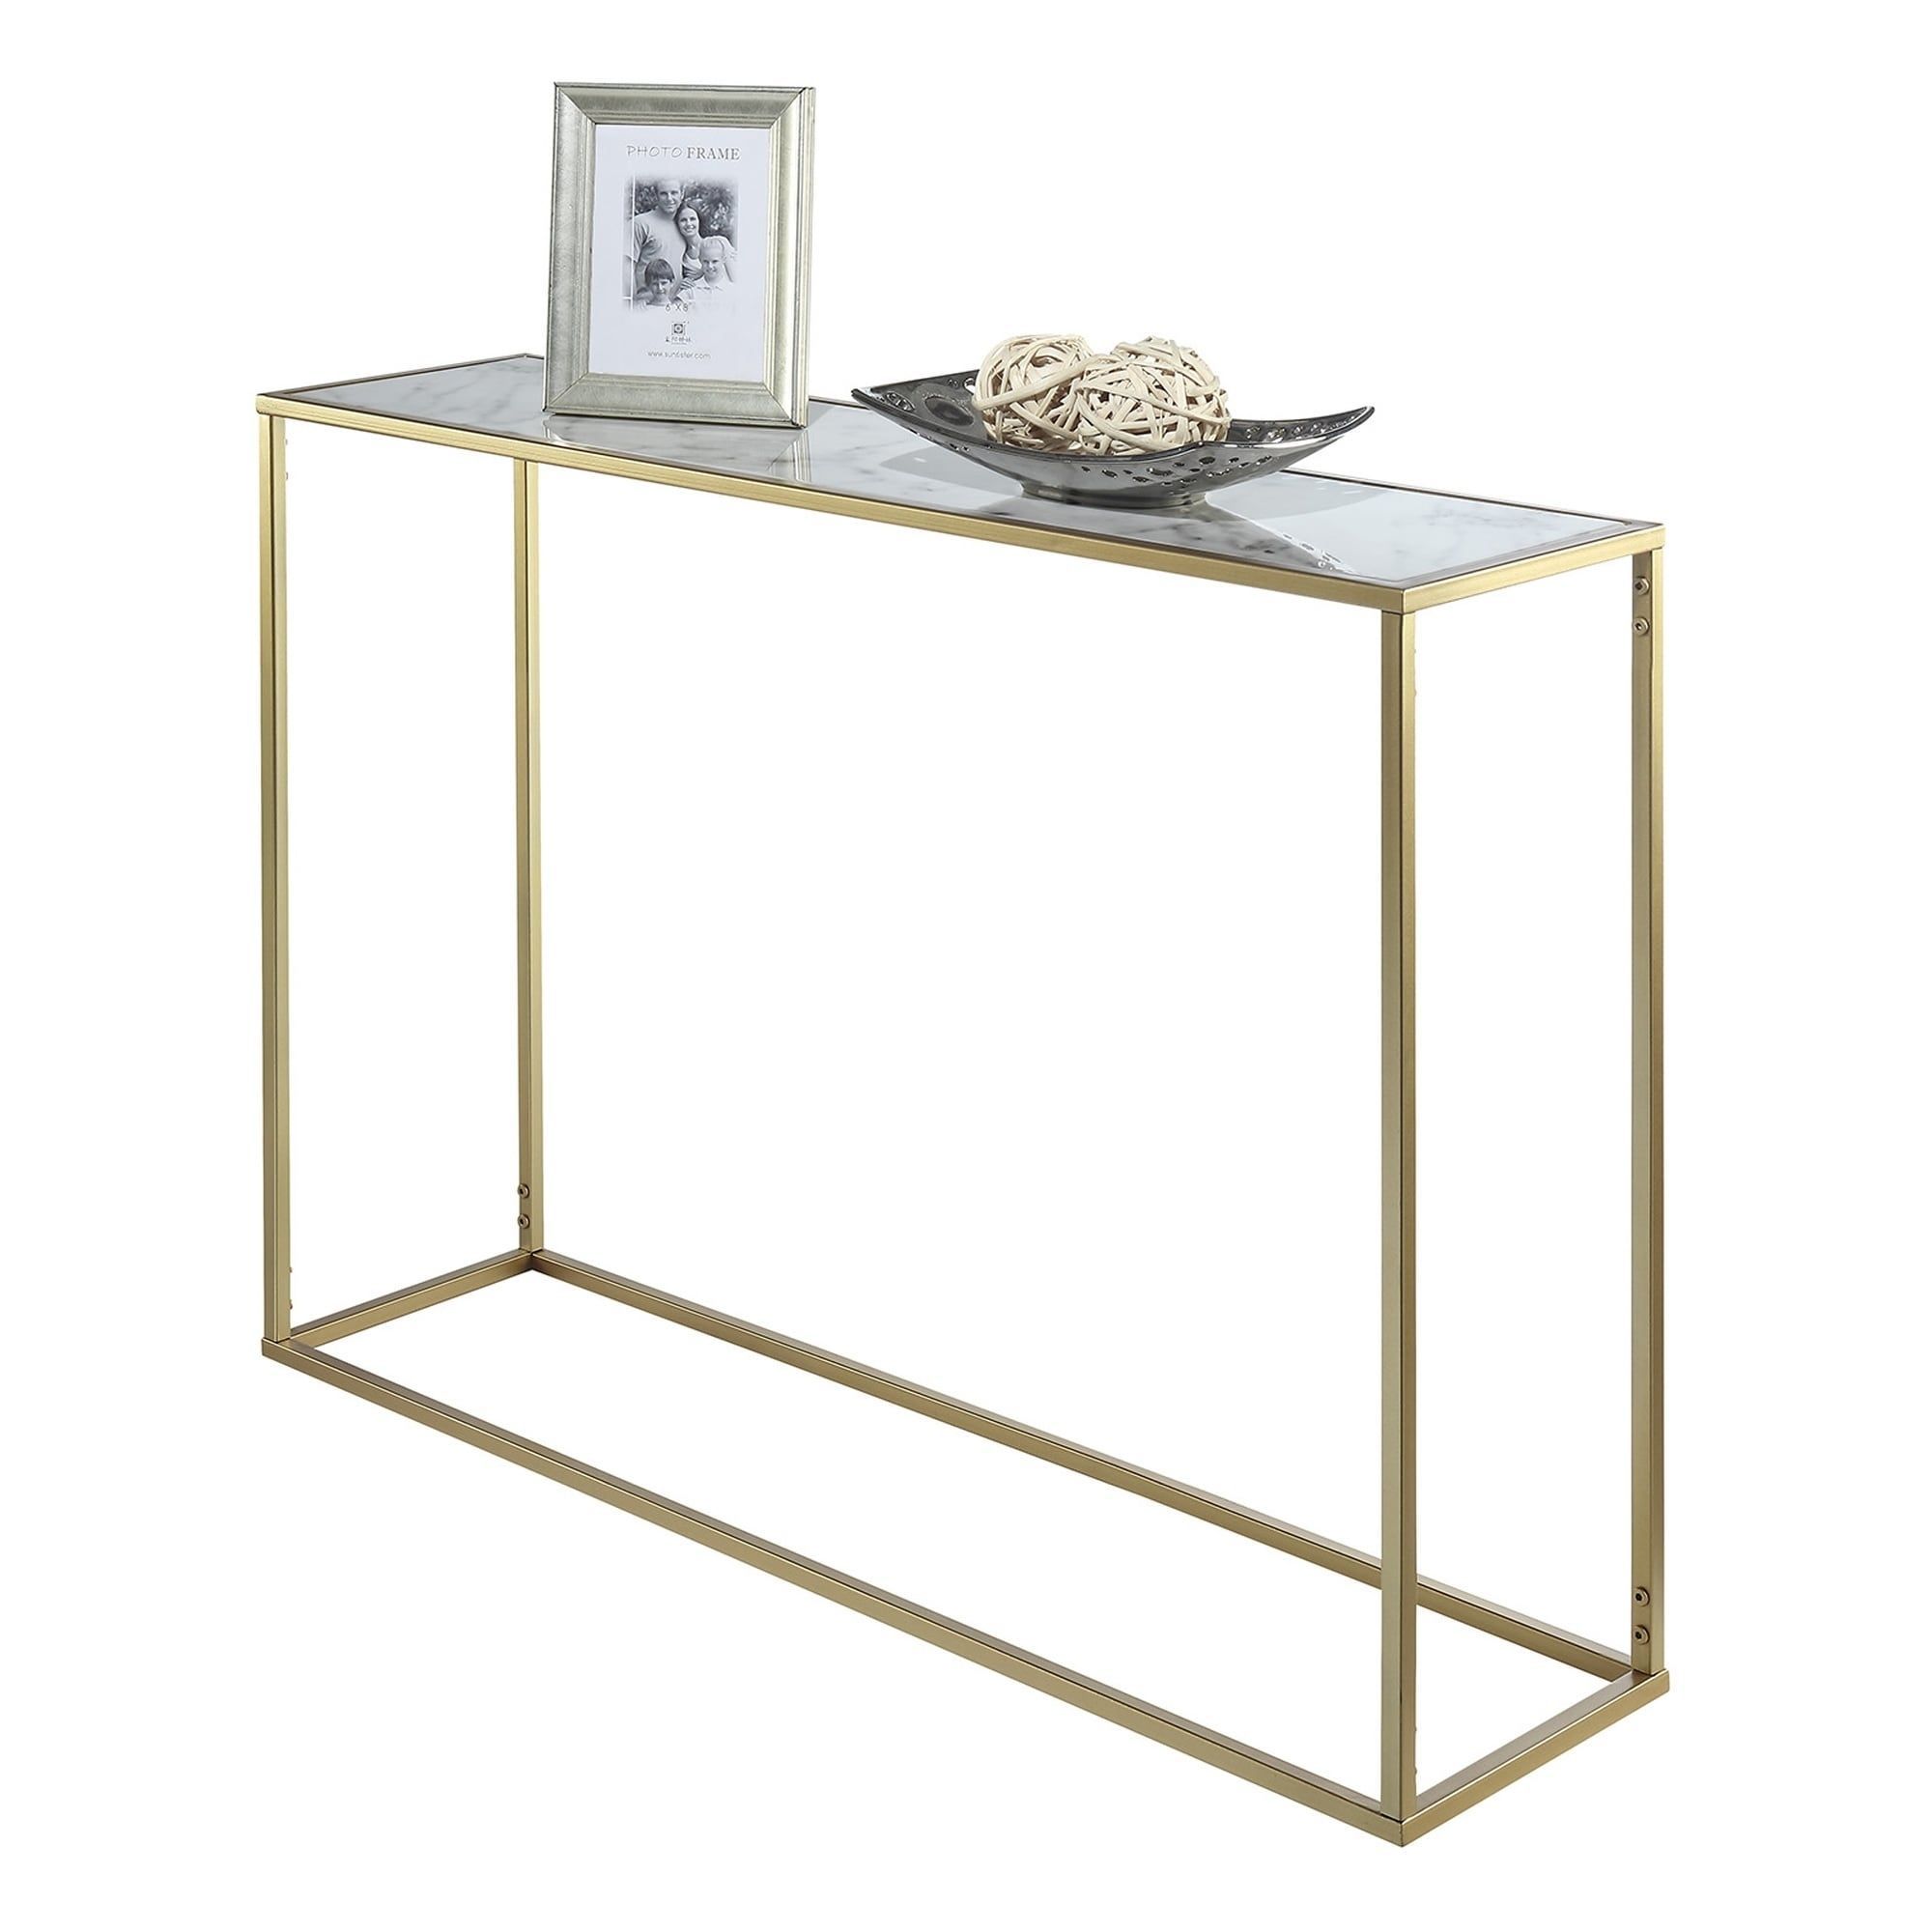 Silver Orchid Hasmik Rectangular Faux Marble Console Table (mirror/gold Regarding Faux Marble Console Tables (View 13 of 20)